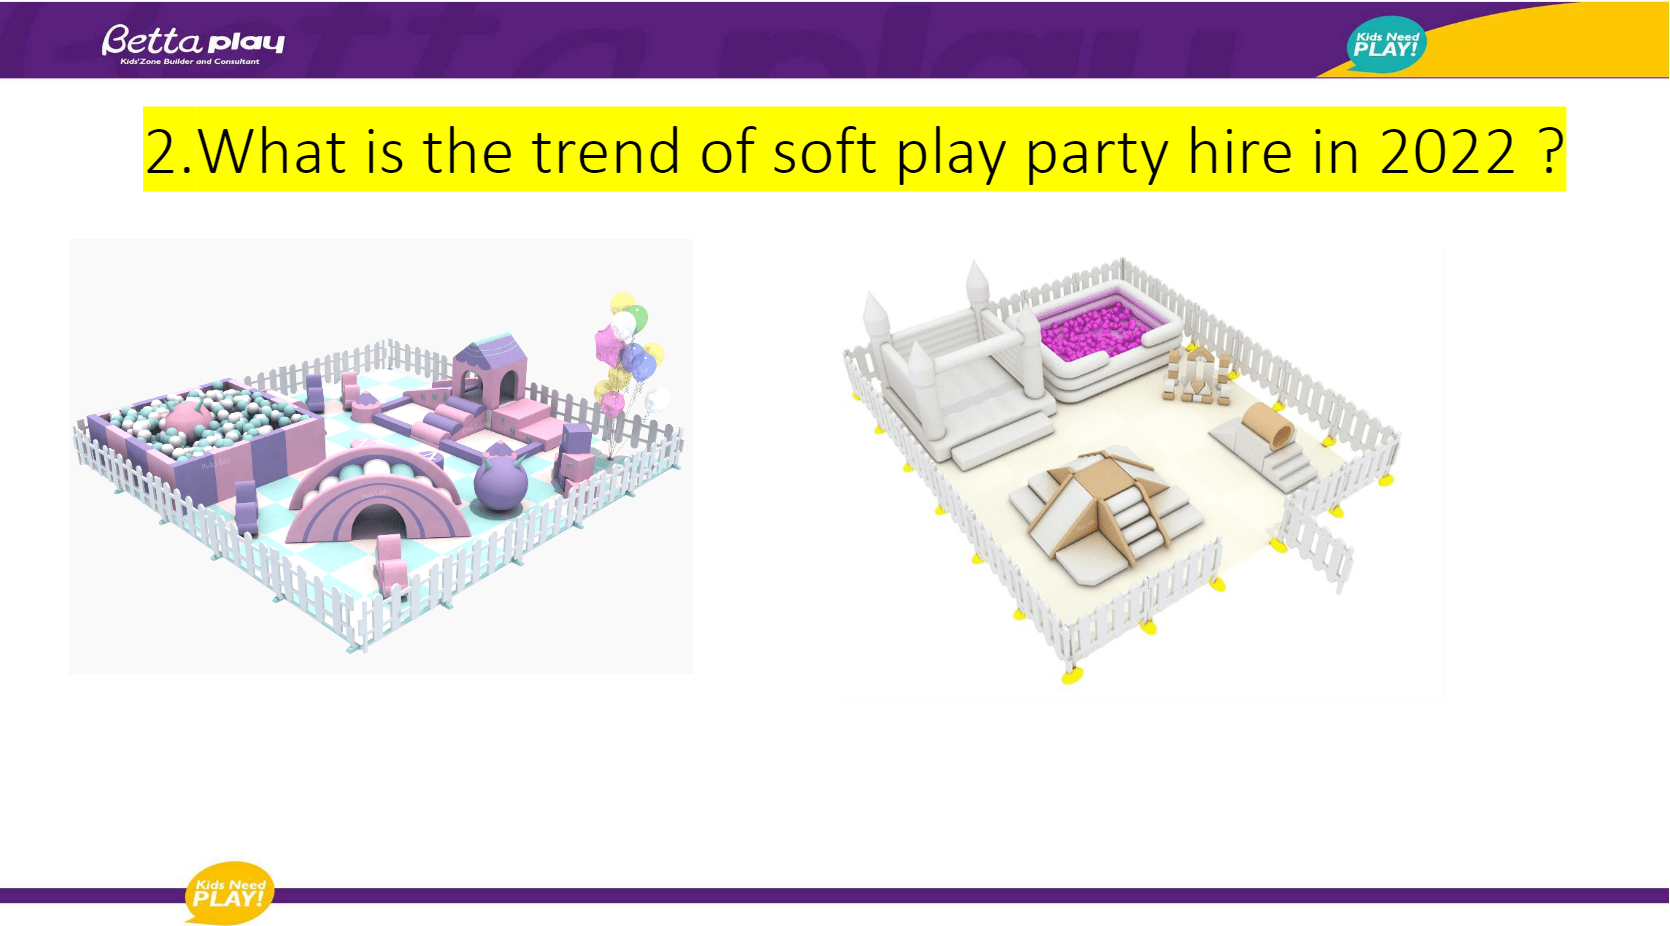 soft play 2022 trend 